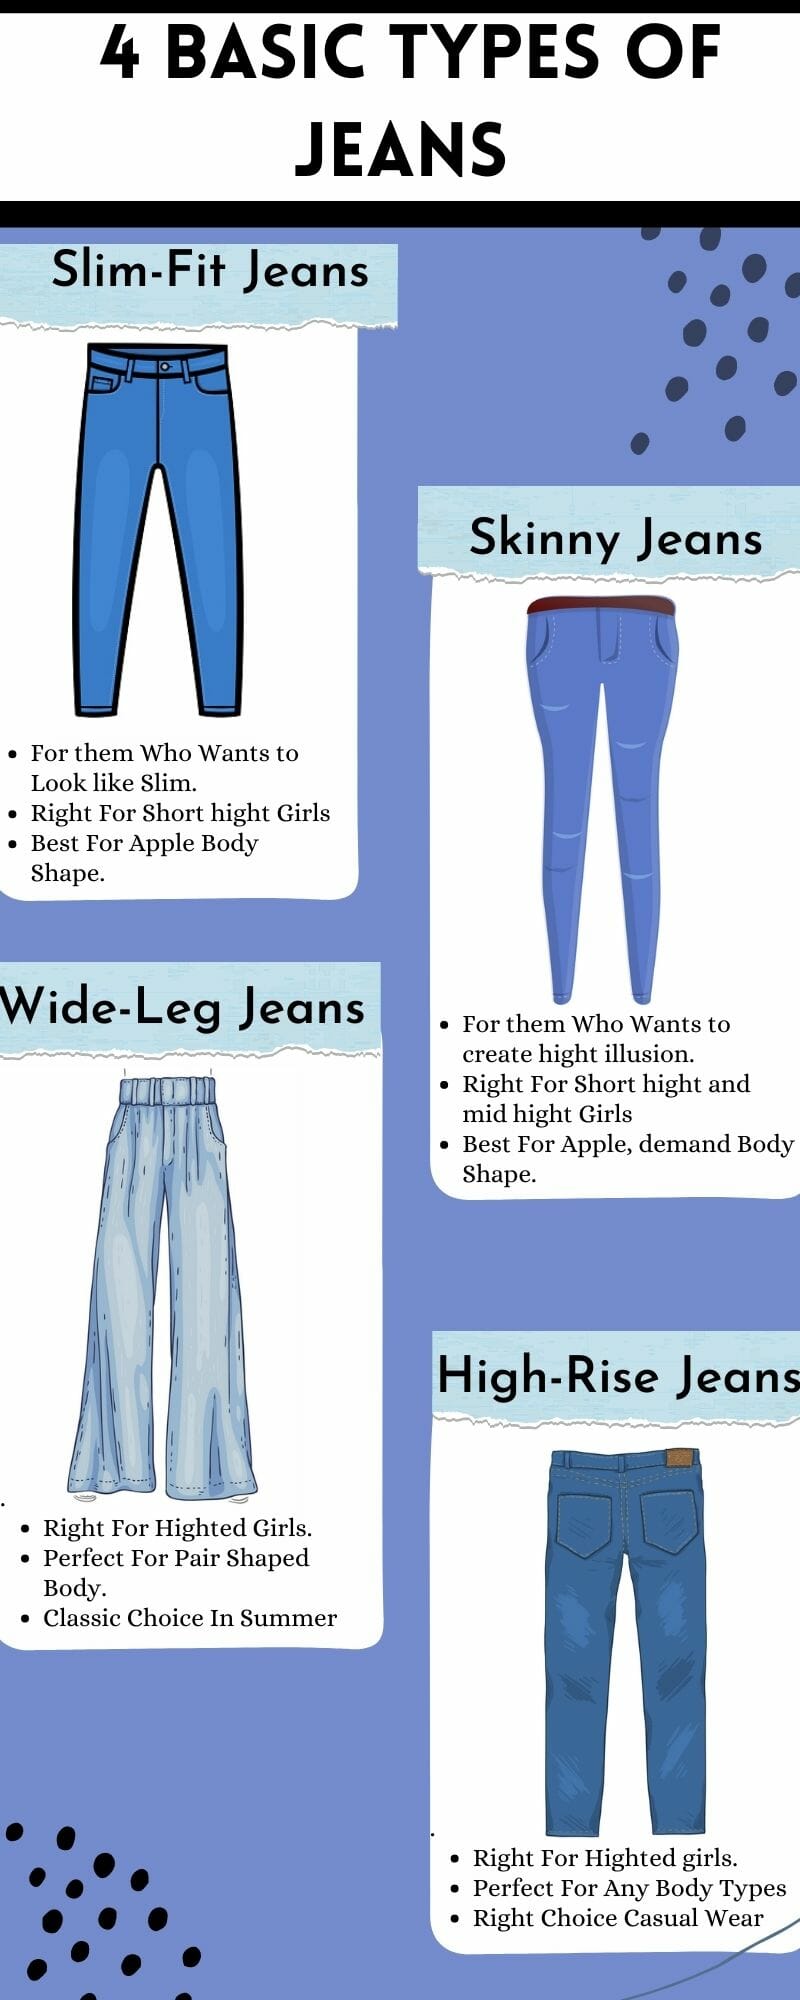 Types of Jeans for Men Every Single Jean Fit Explained  GQ